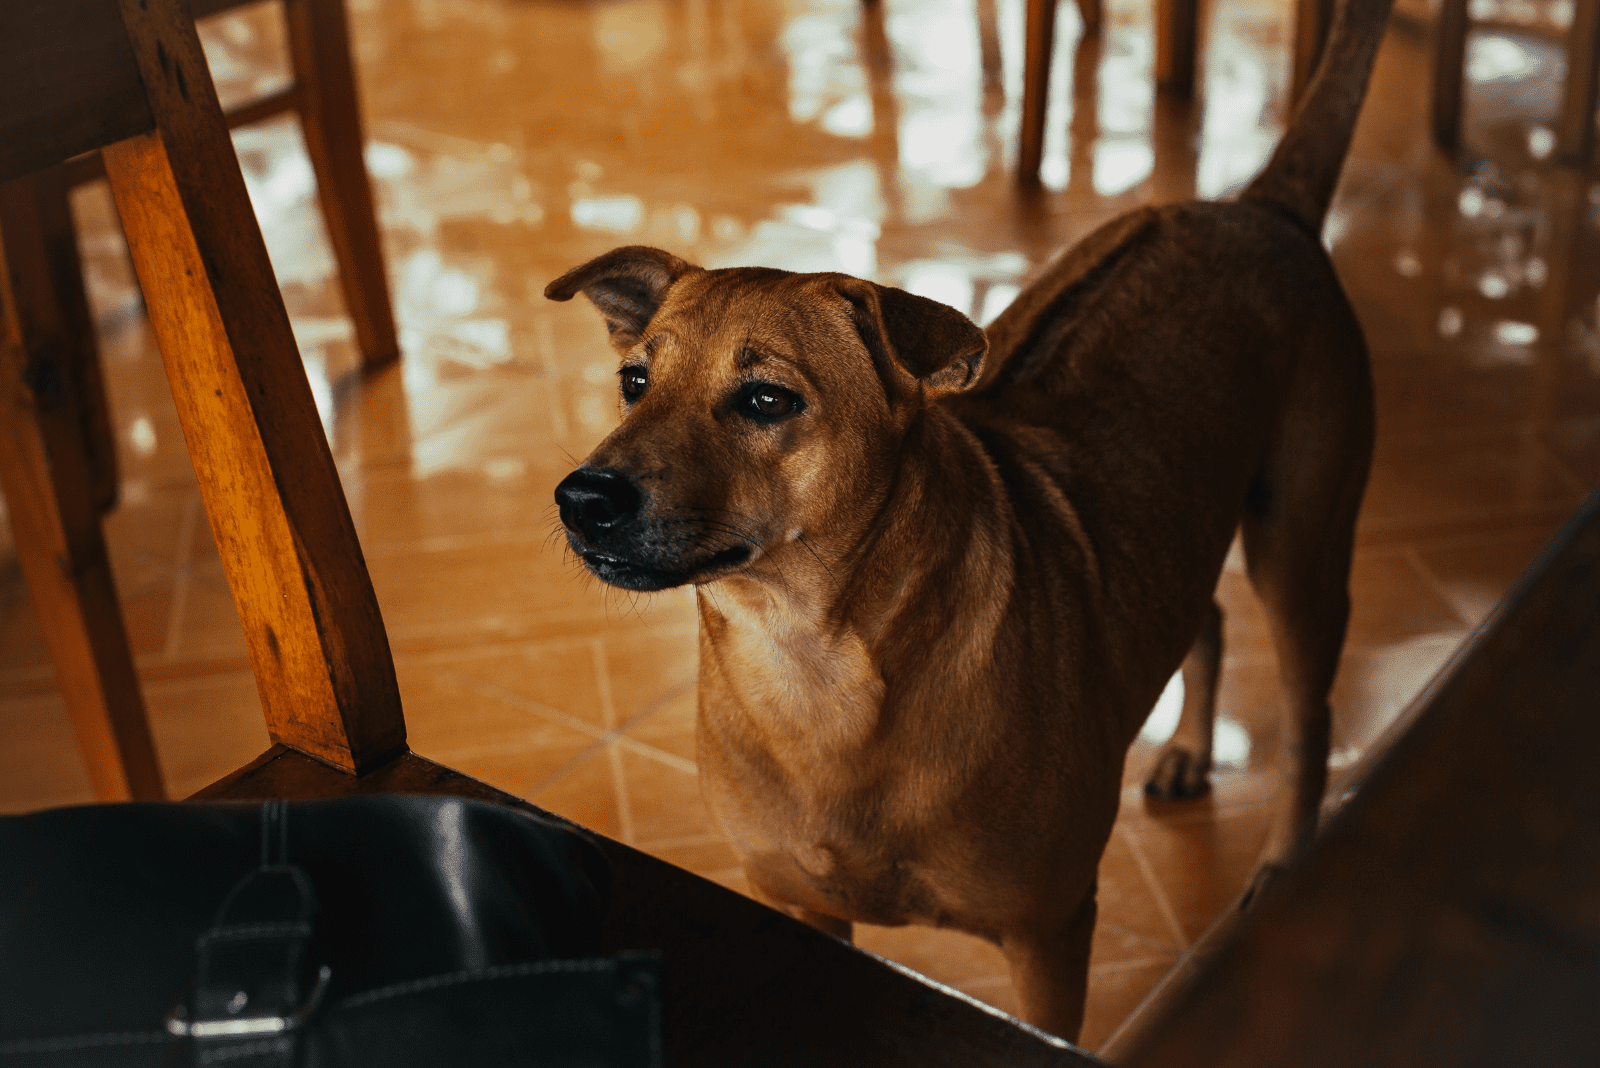 Phu Quoc Ridgeback stands and waits for food